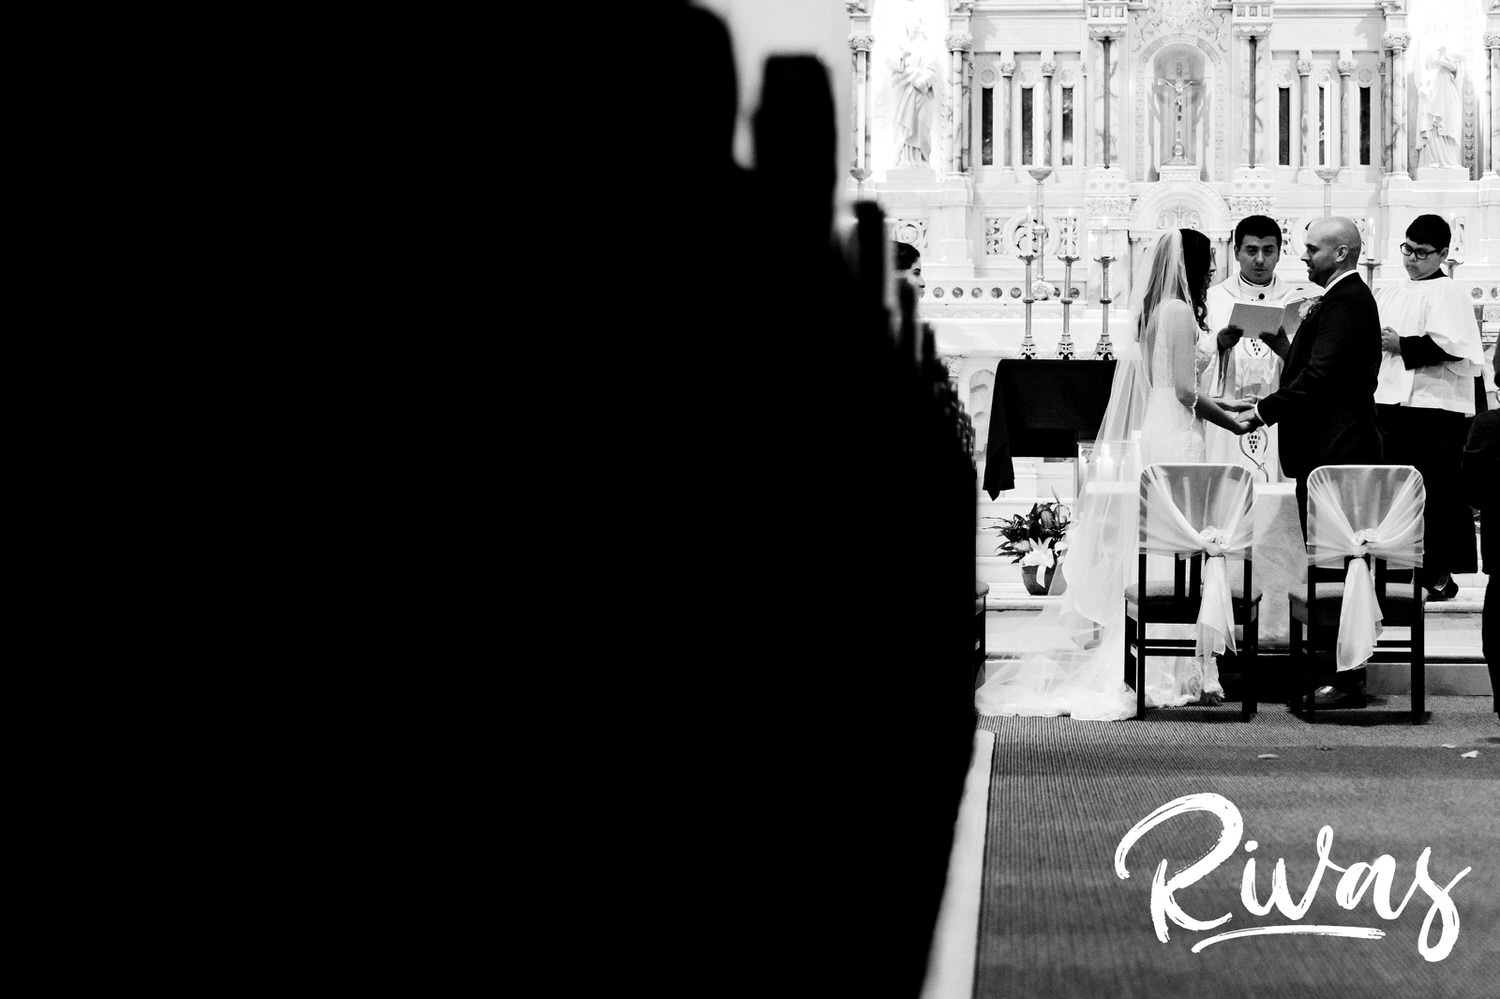 A black and white picture taken from the back of the church of a bride and groom standing at the front of the church during their wedding ceremony. 